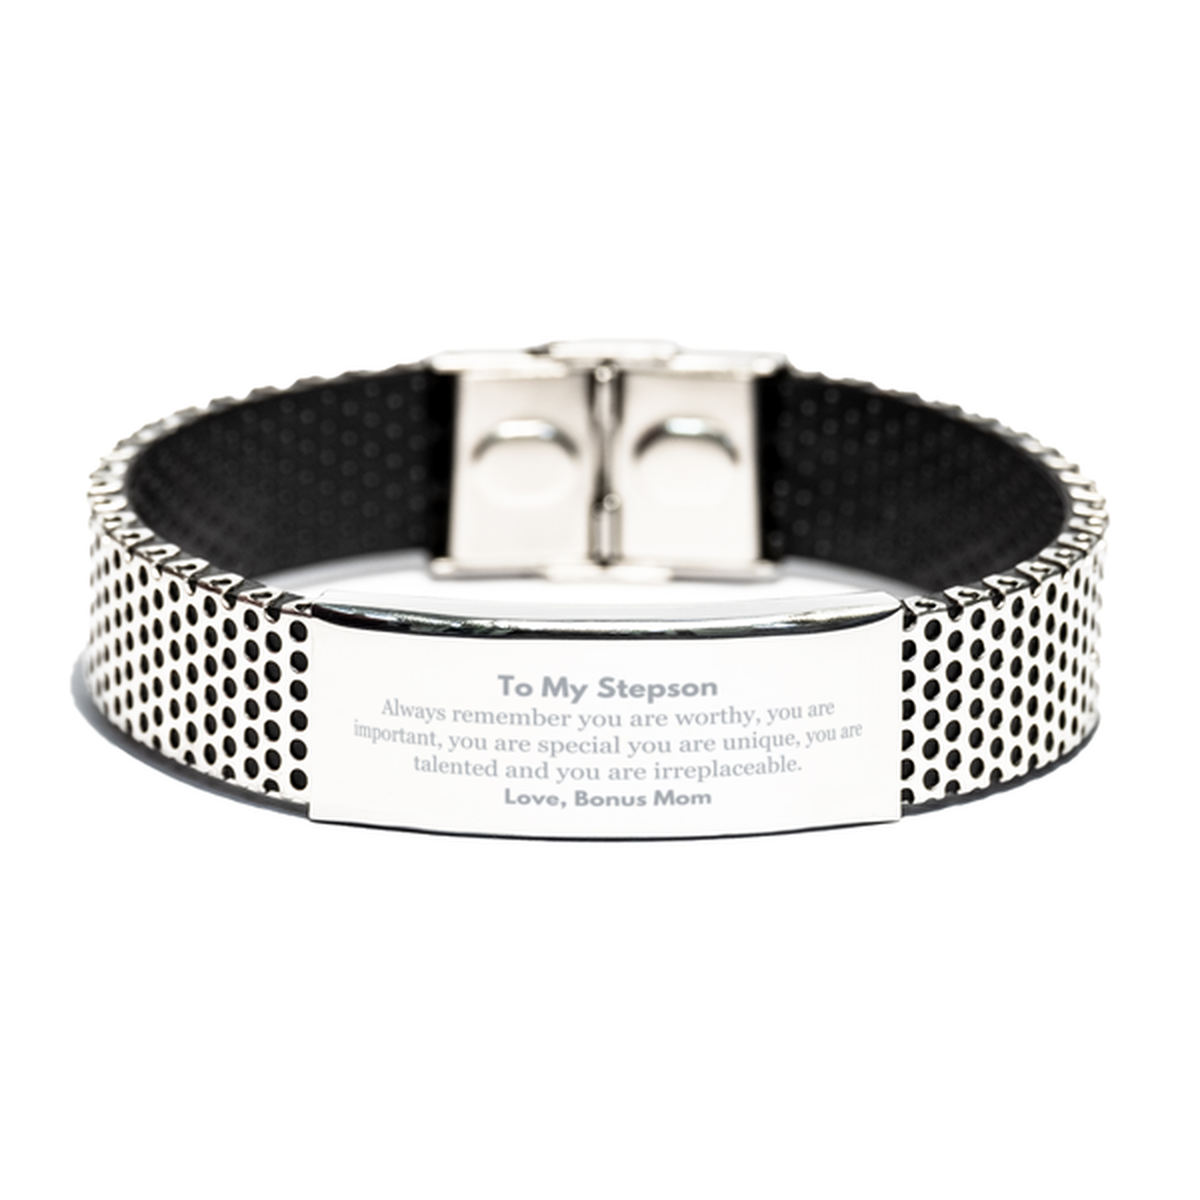 Stepson Birthday Gifts from Bonus Mom, Inspirational Stainless Steel Bracelet for Stepson Christmas Graduation Gifts for Stepson Always remember you are worthy, you are important. Love, Bonus Mom